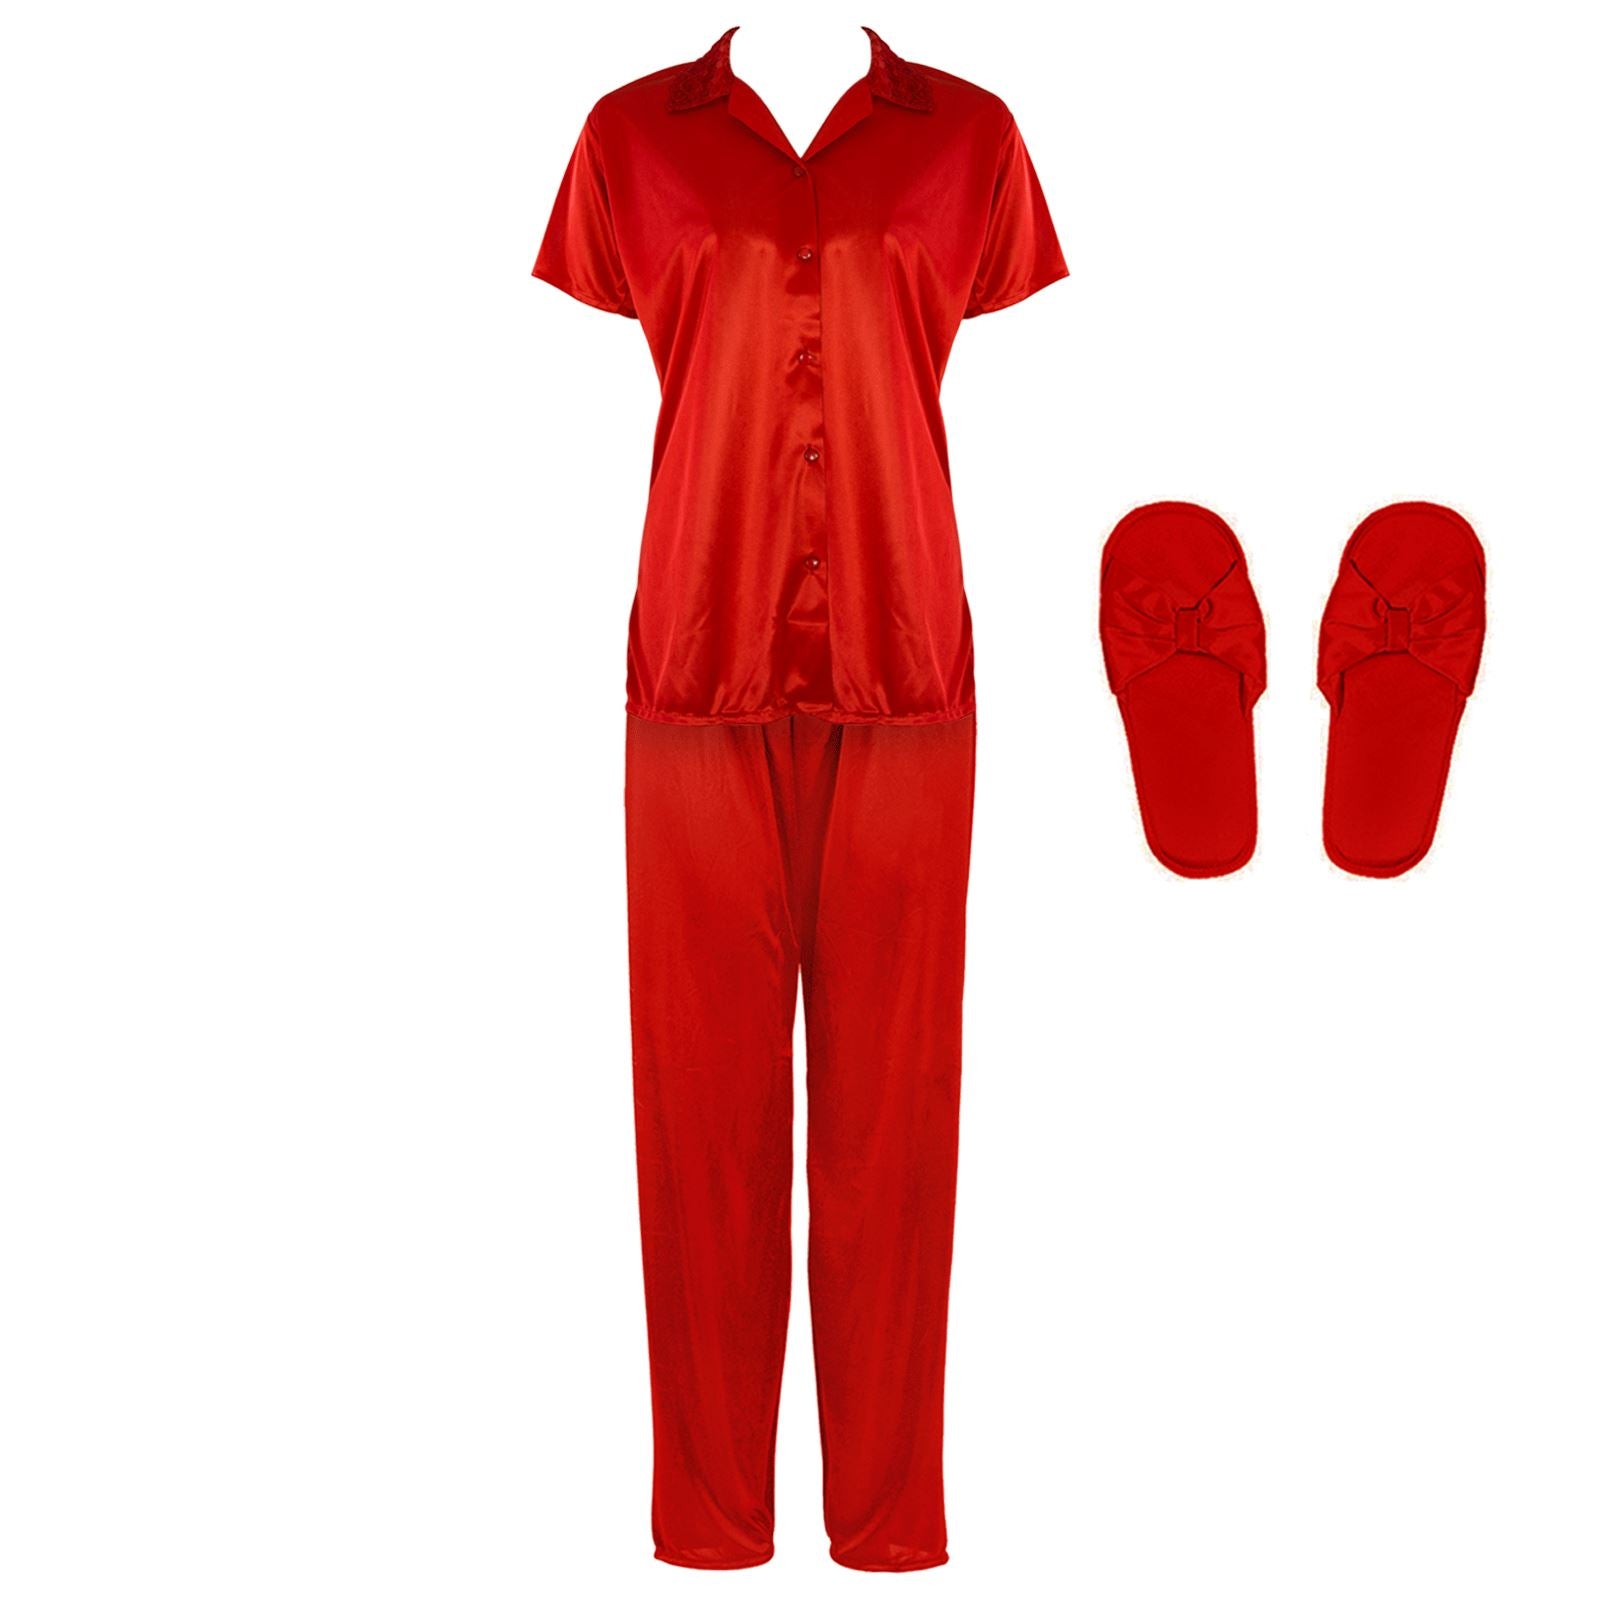 Red / One Size Satin Pyjama Set With Bedroom Sleepers The Orange Tags